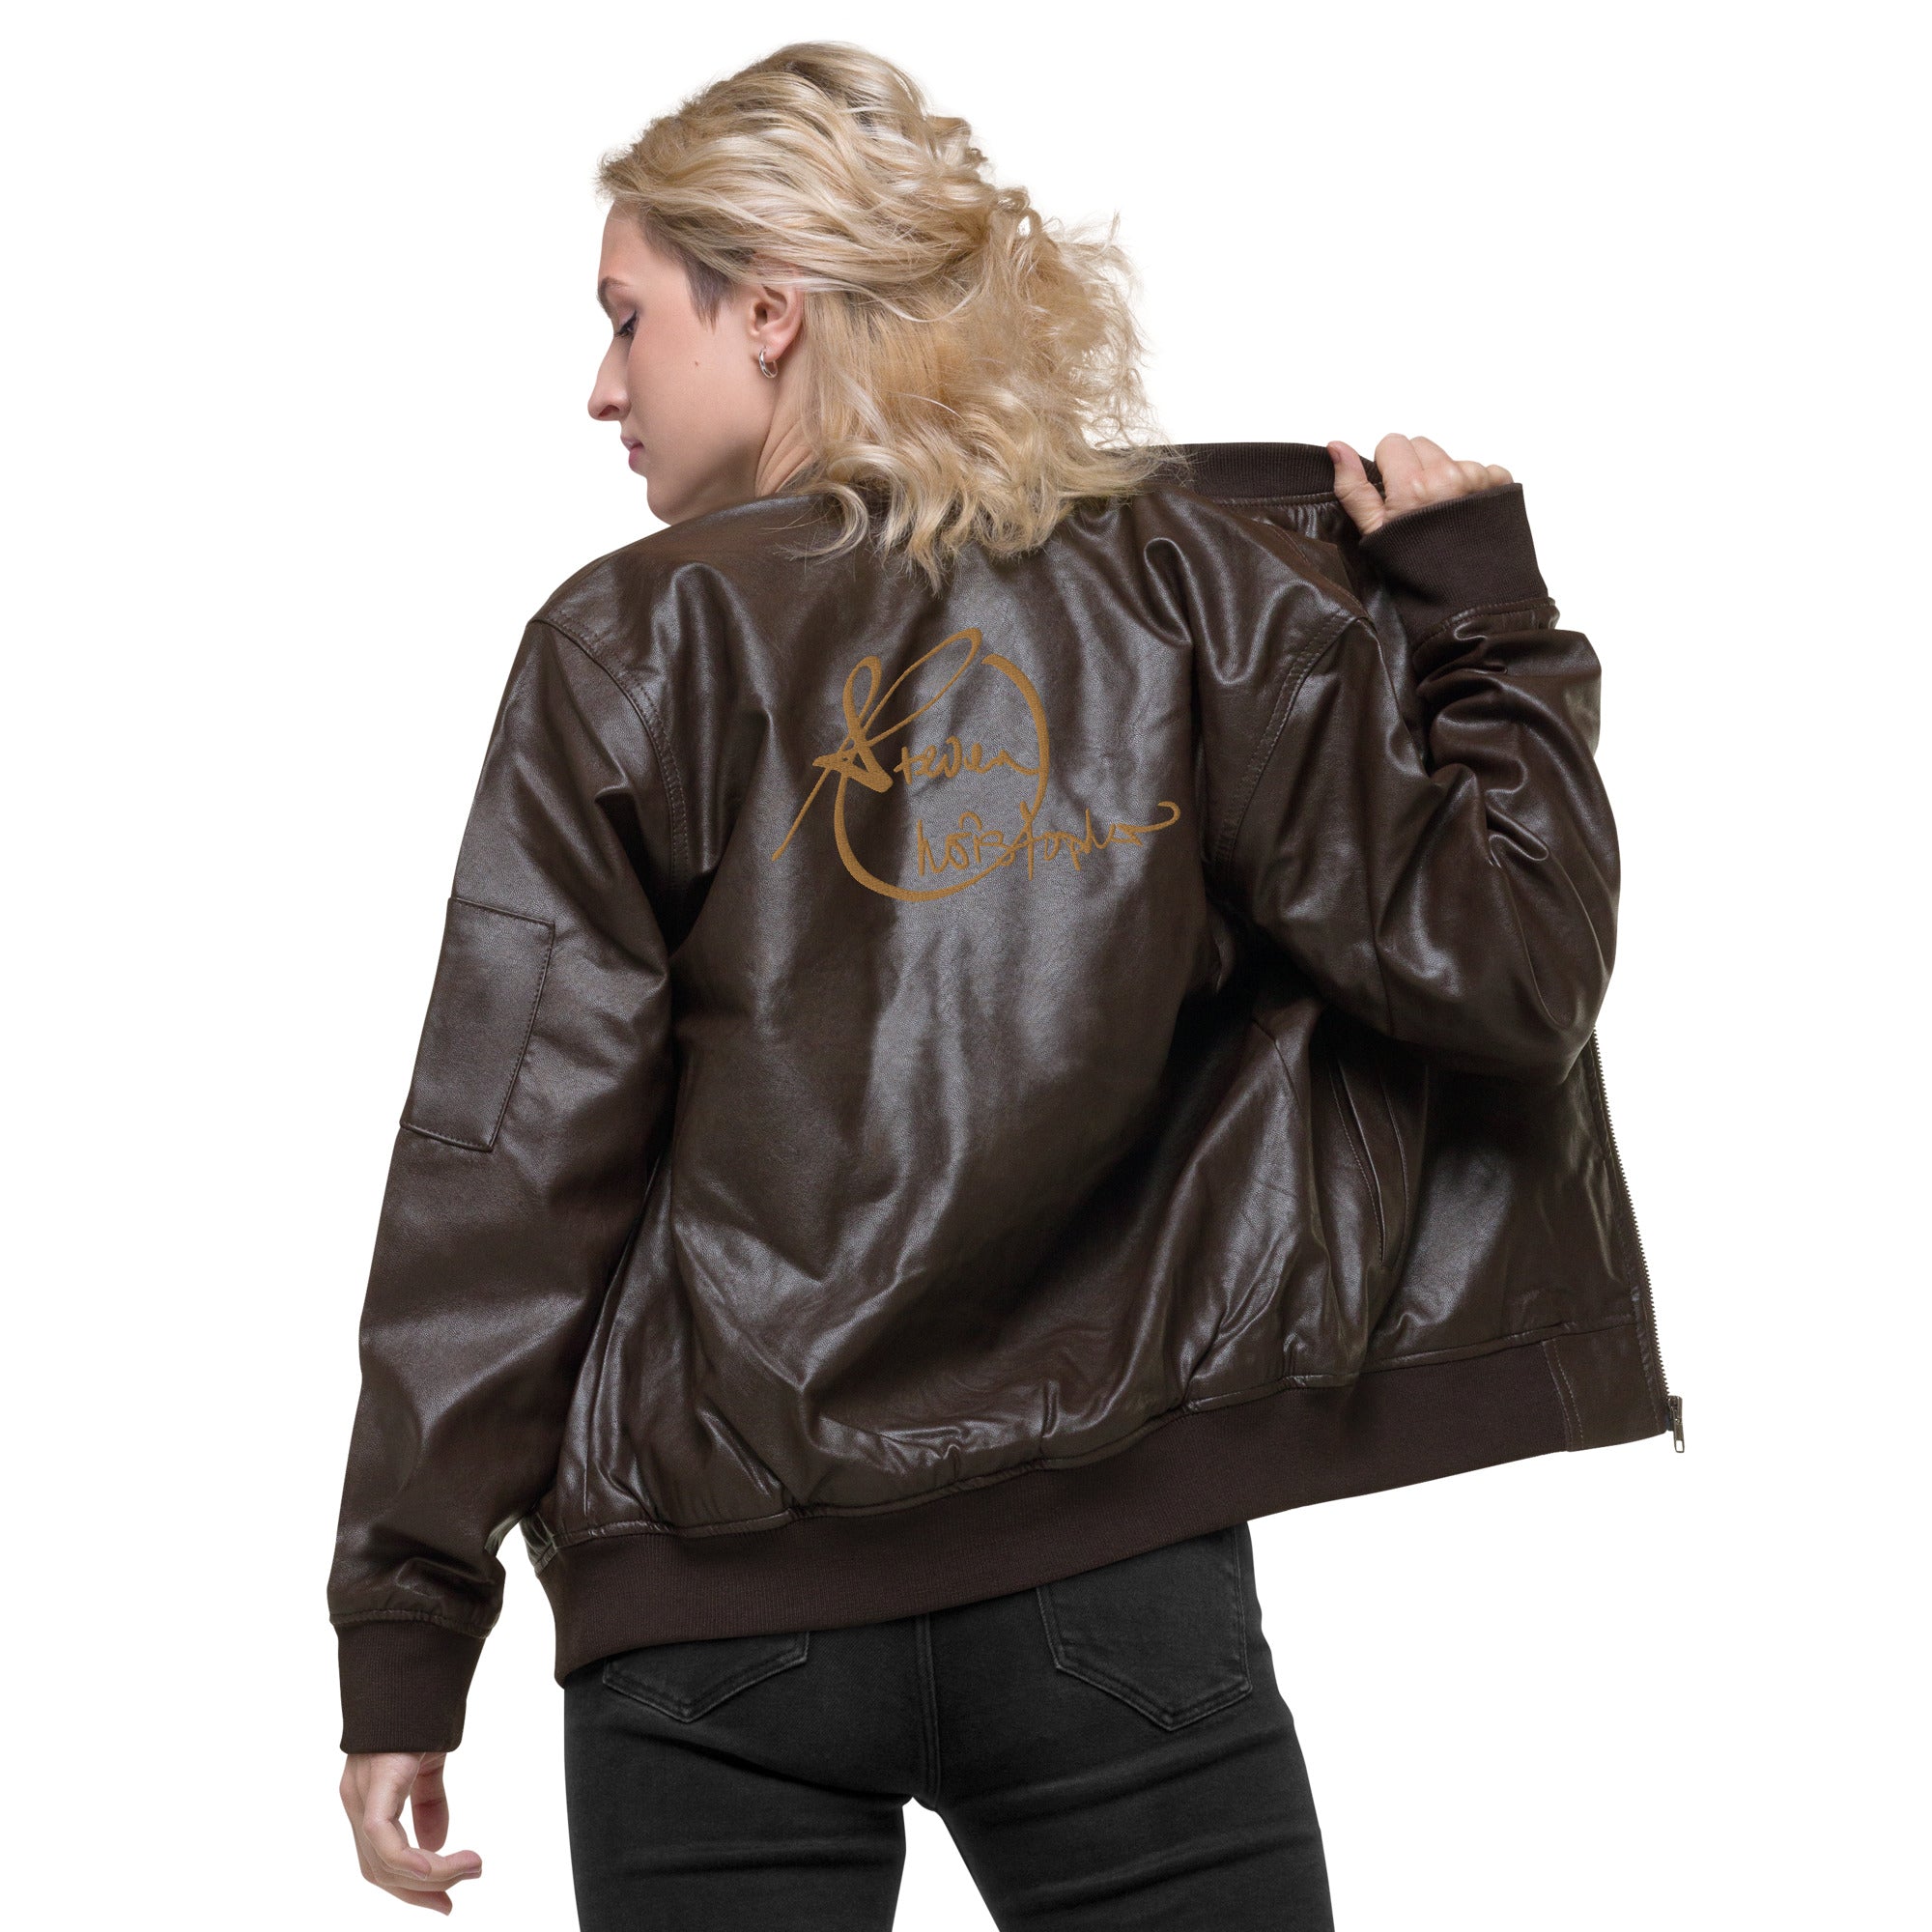 Steven Christopher Lifestyle Wear | Unisex Brown Faux Leather Bomber Jacket  w/ White & Olde Gold Embroidery